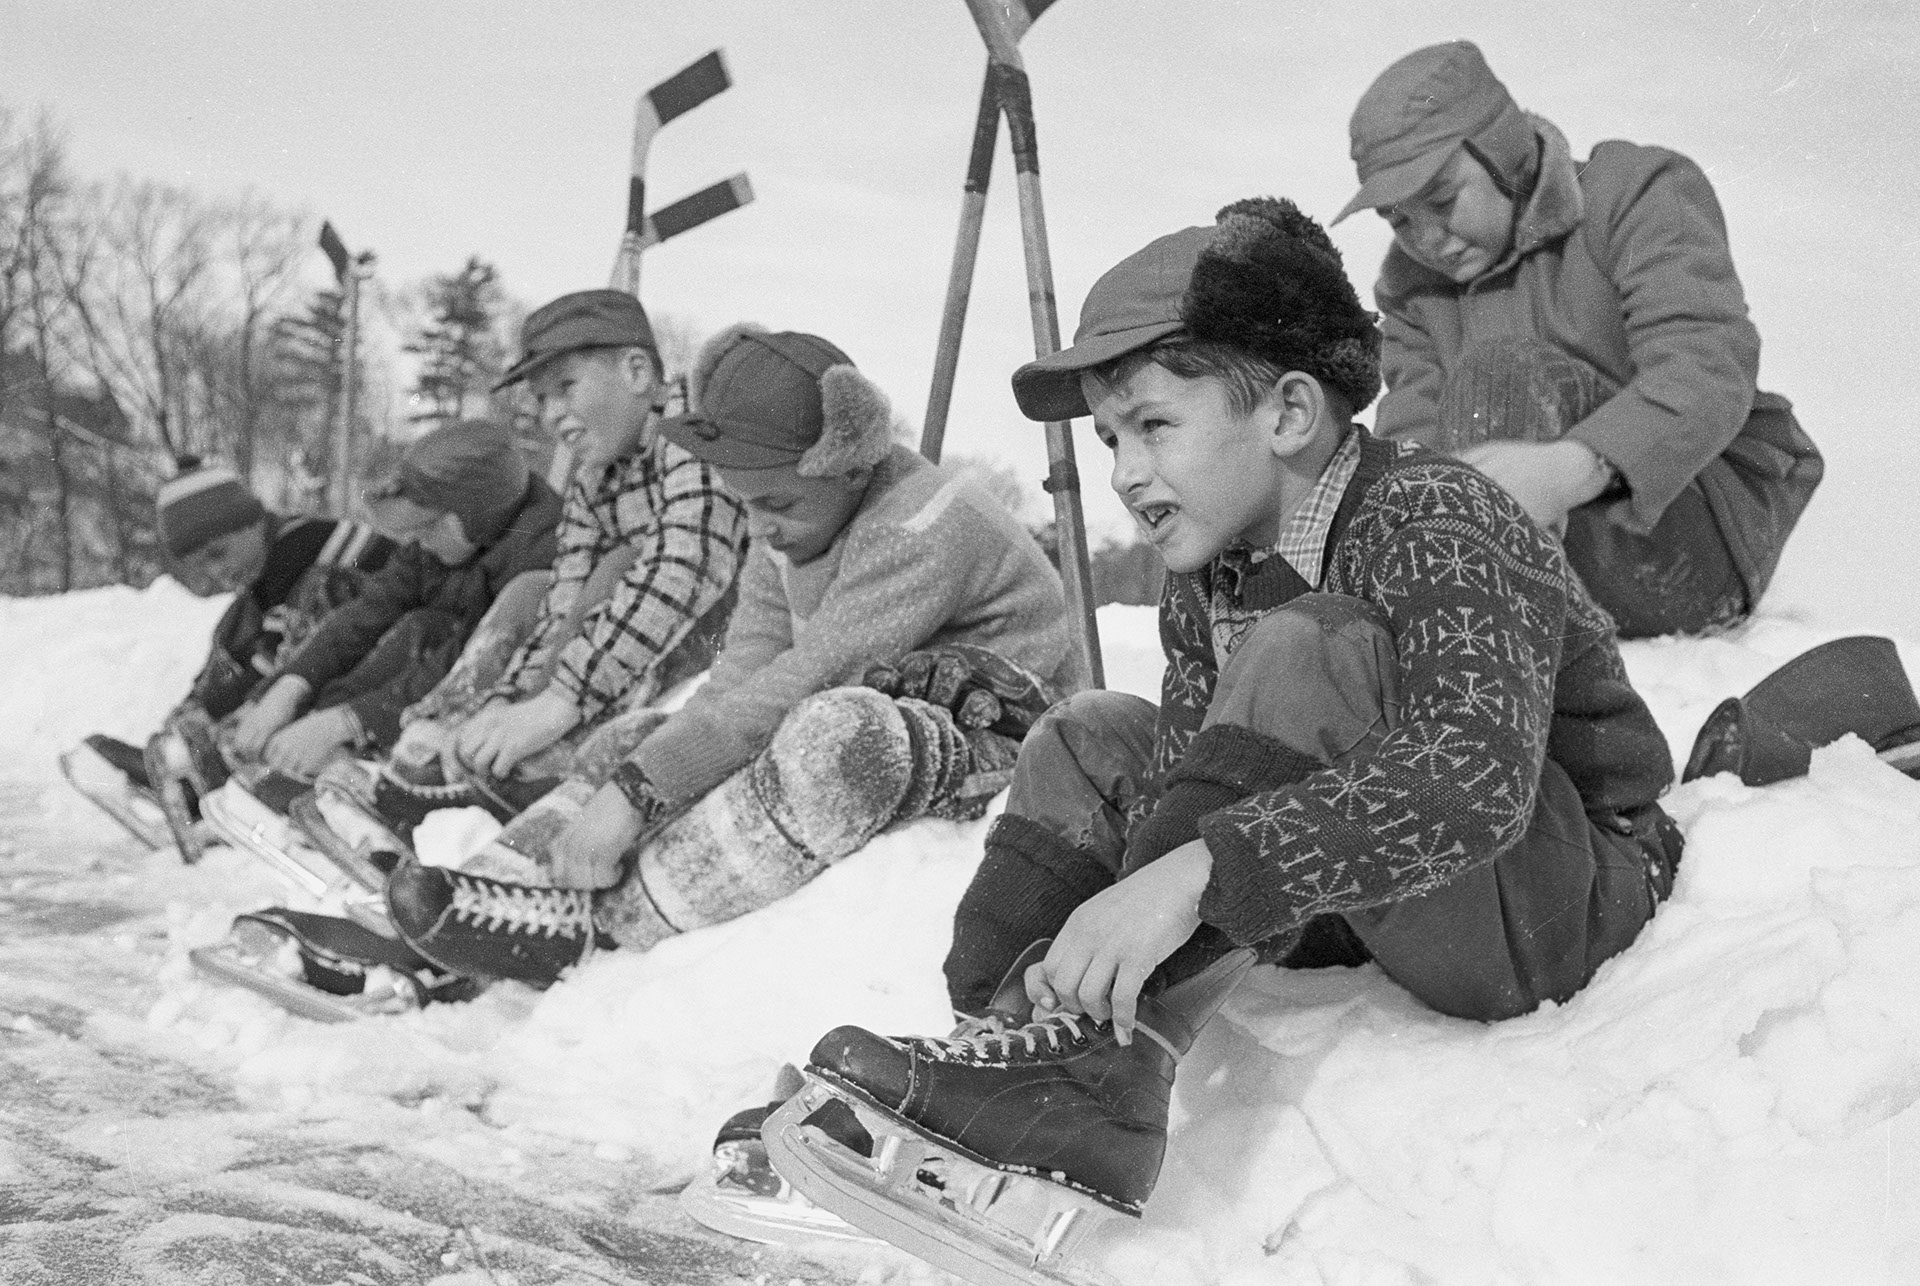 Group of boys sitting on a snowbank, lacing up their hockey skates